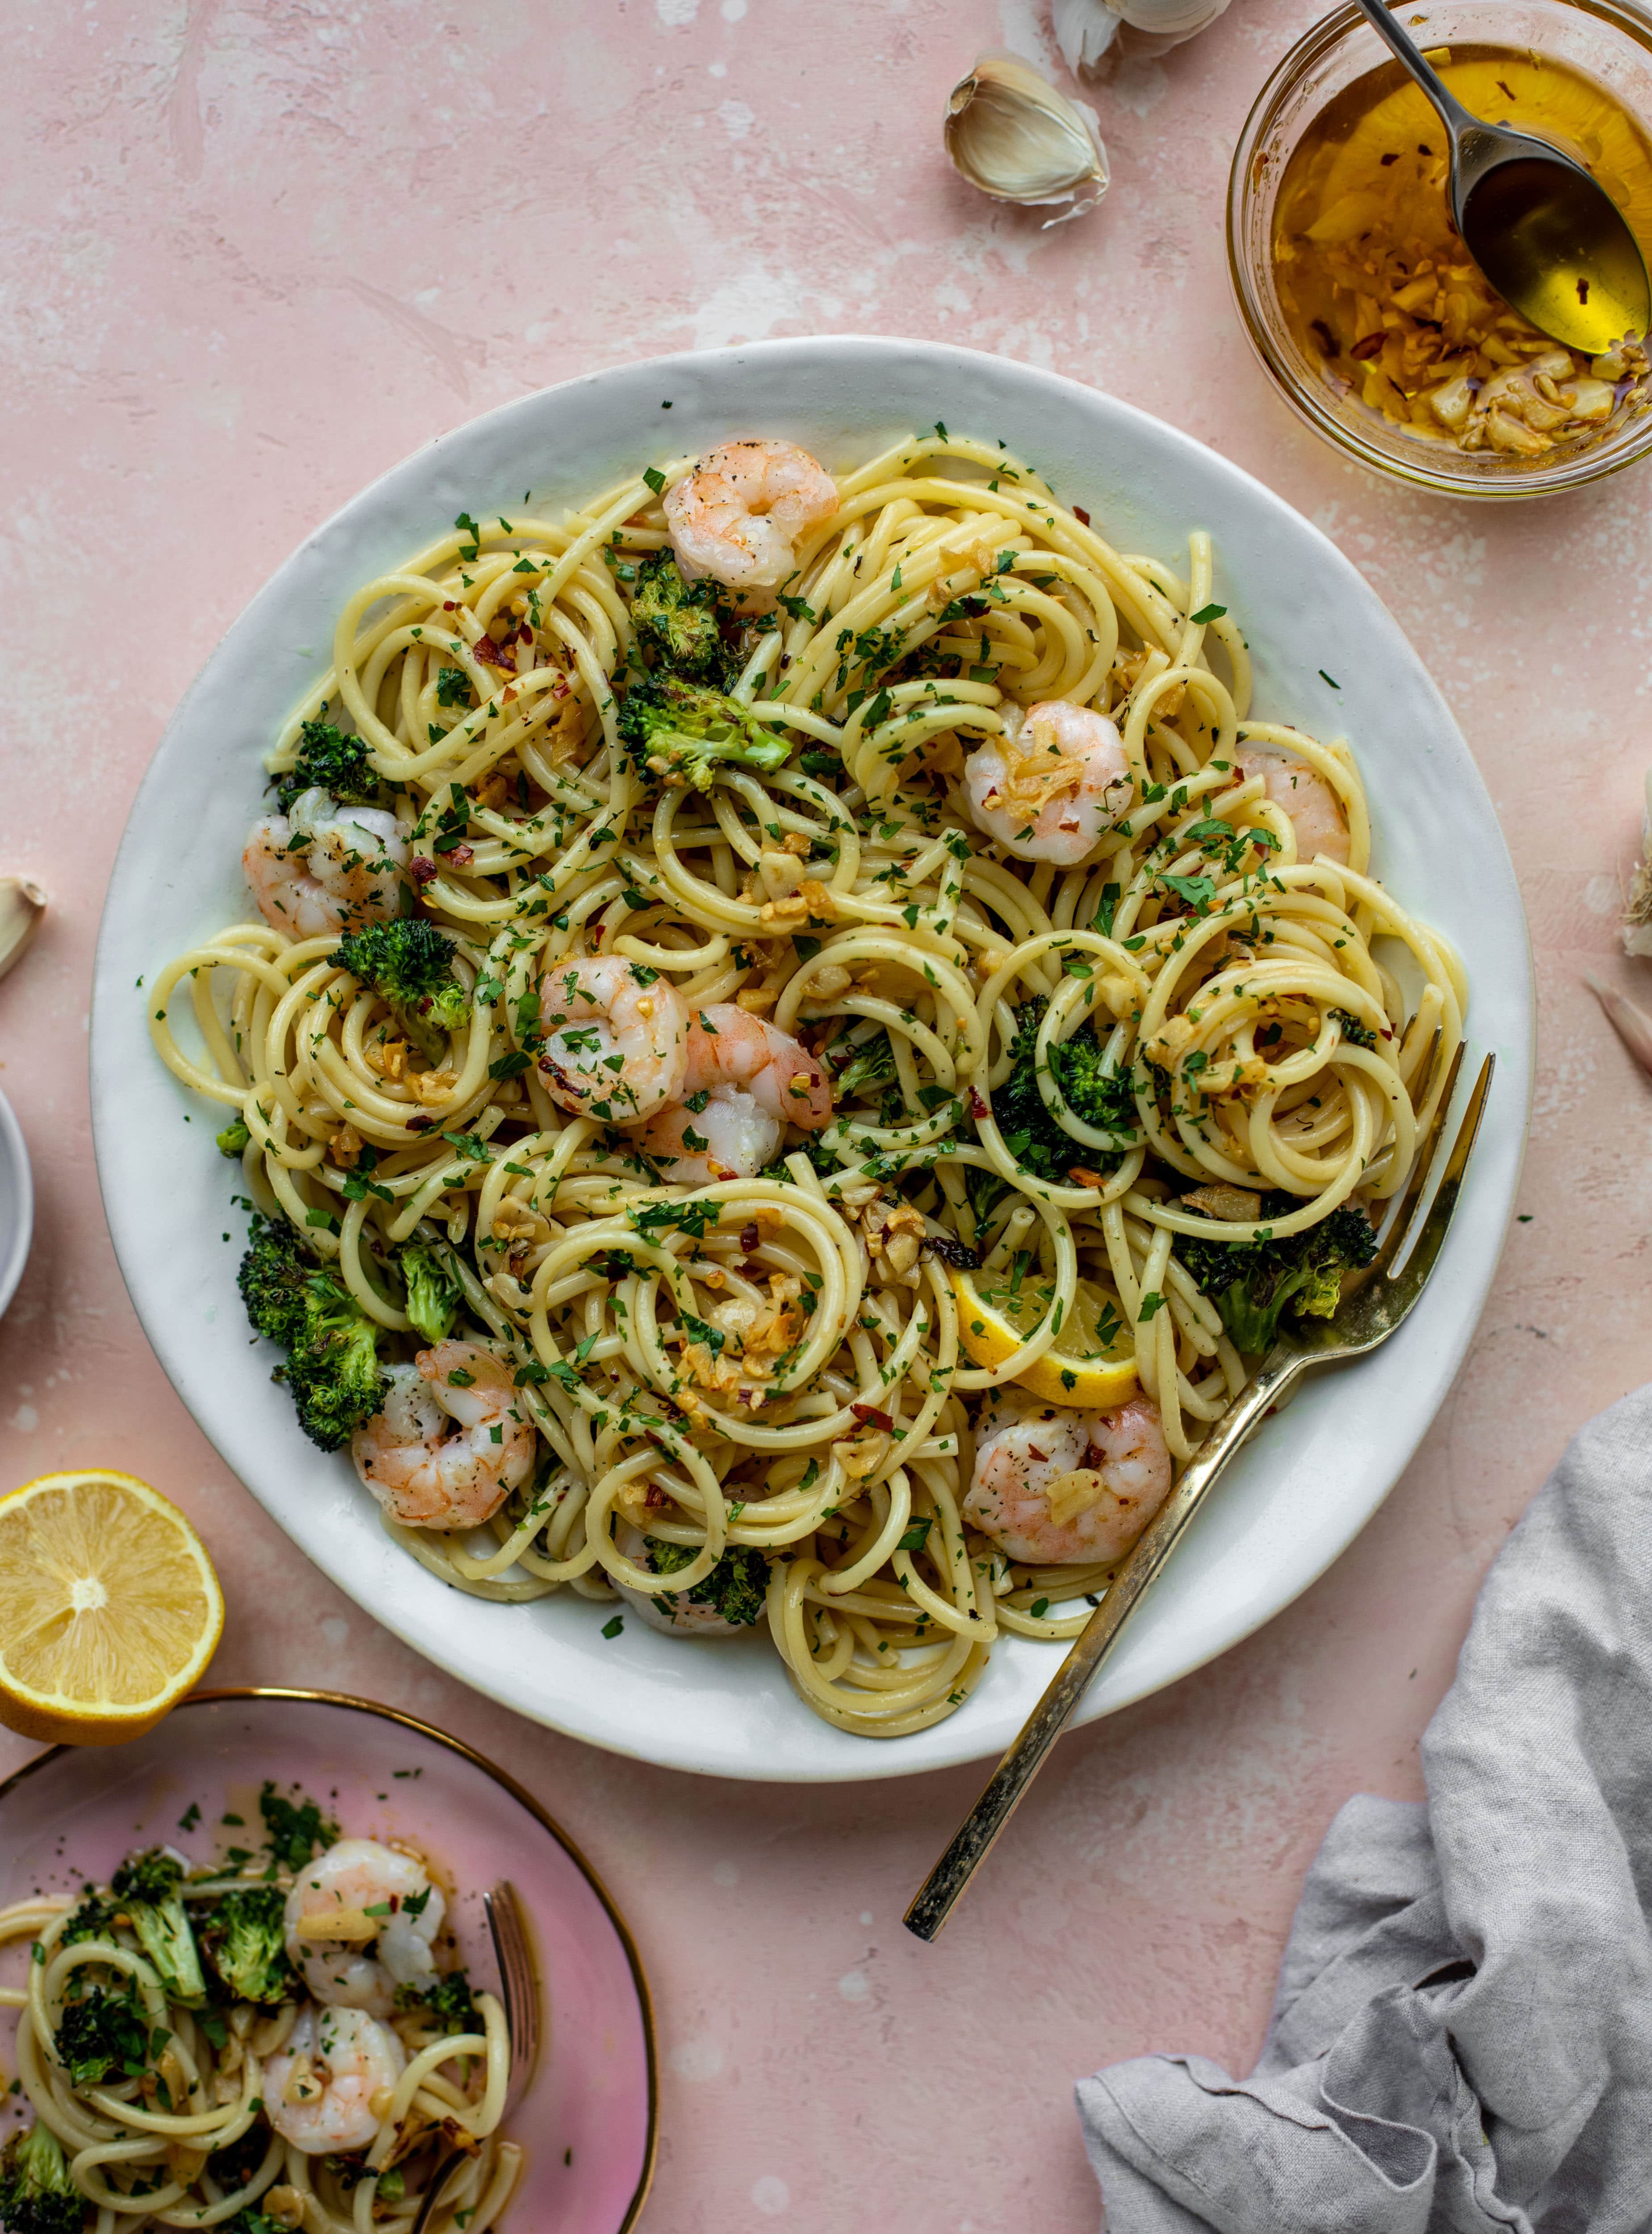 This garlic sauce pasta is incredible! Roasted shrimp and broccoli twirled with garlic oil noodles and crushed red pepper. Divine!